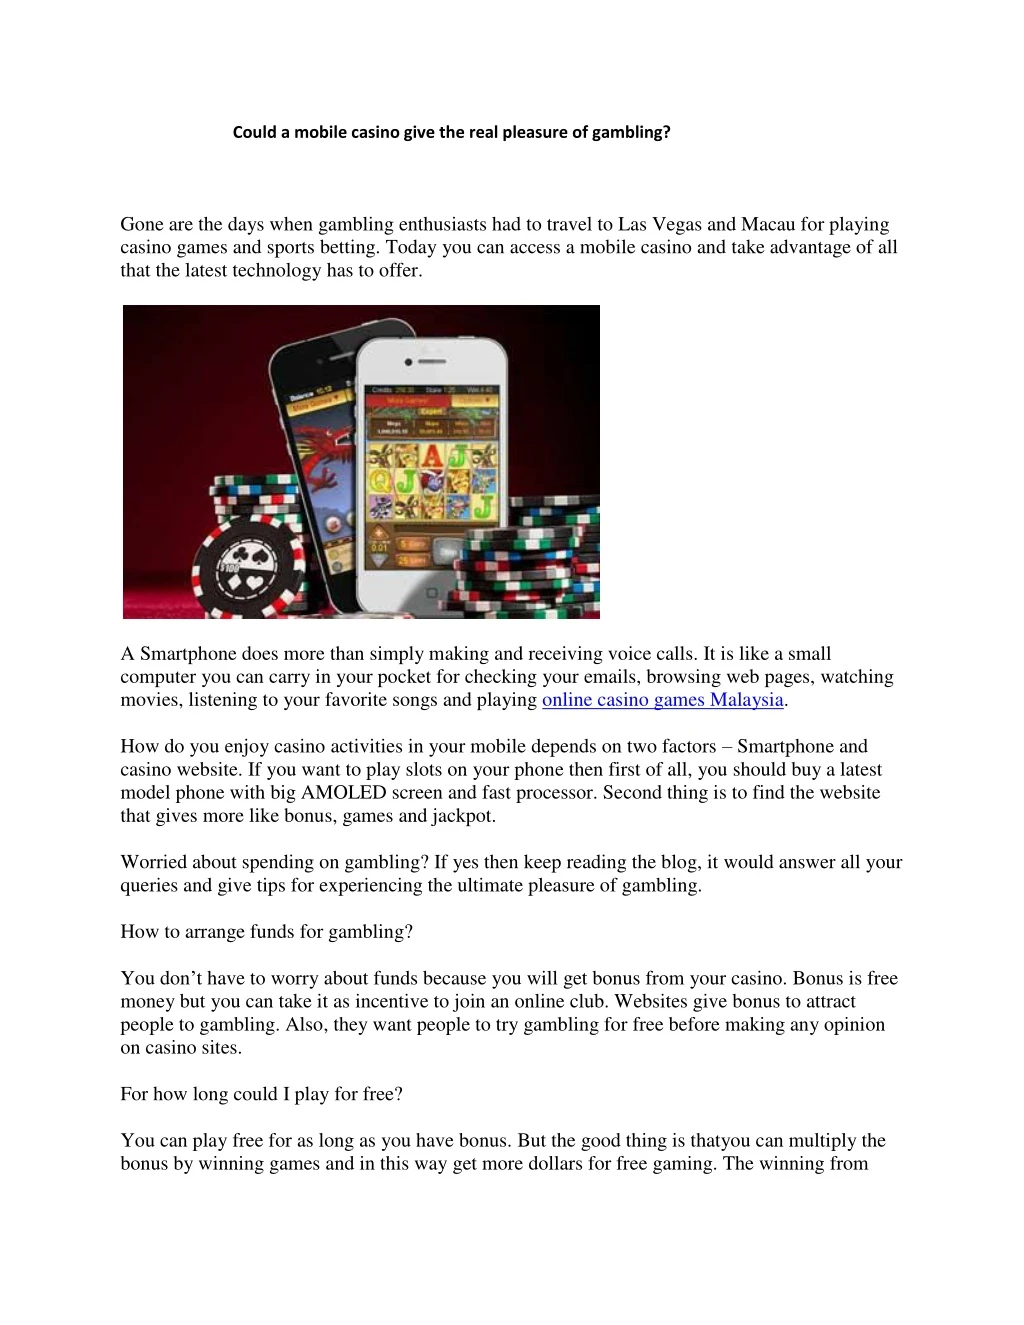 could a mobile casino give the real pleasure